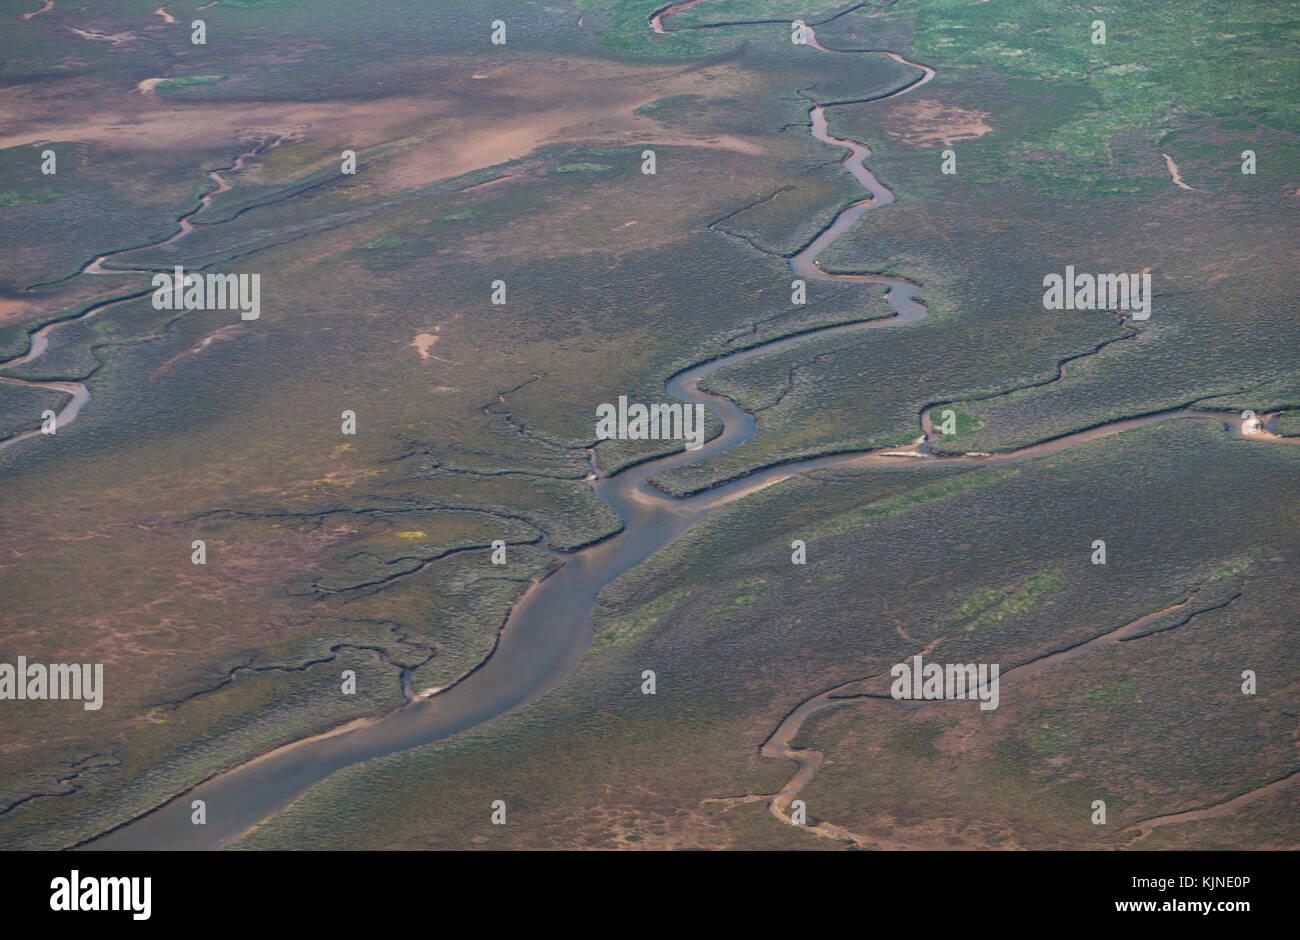 The image shows the Wadden Sea of the East Frisian Islands from the air Stock Photo